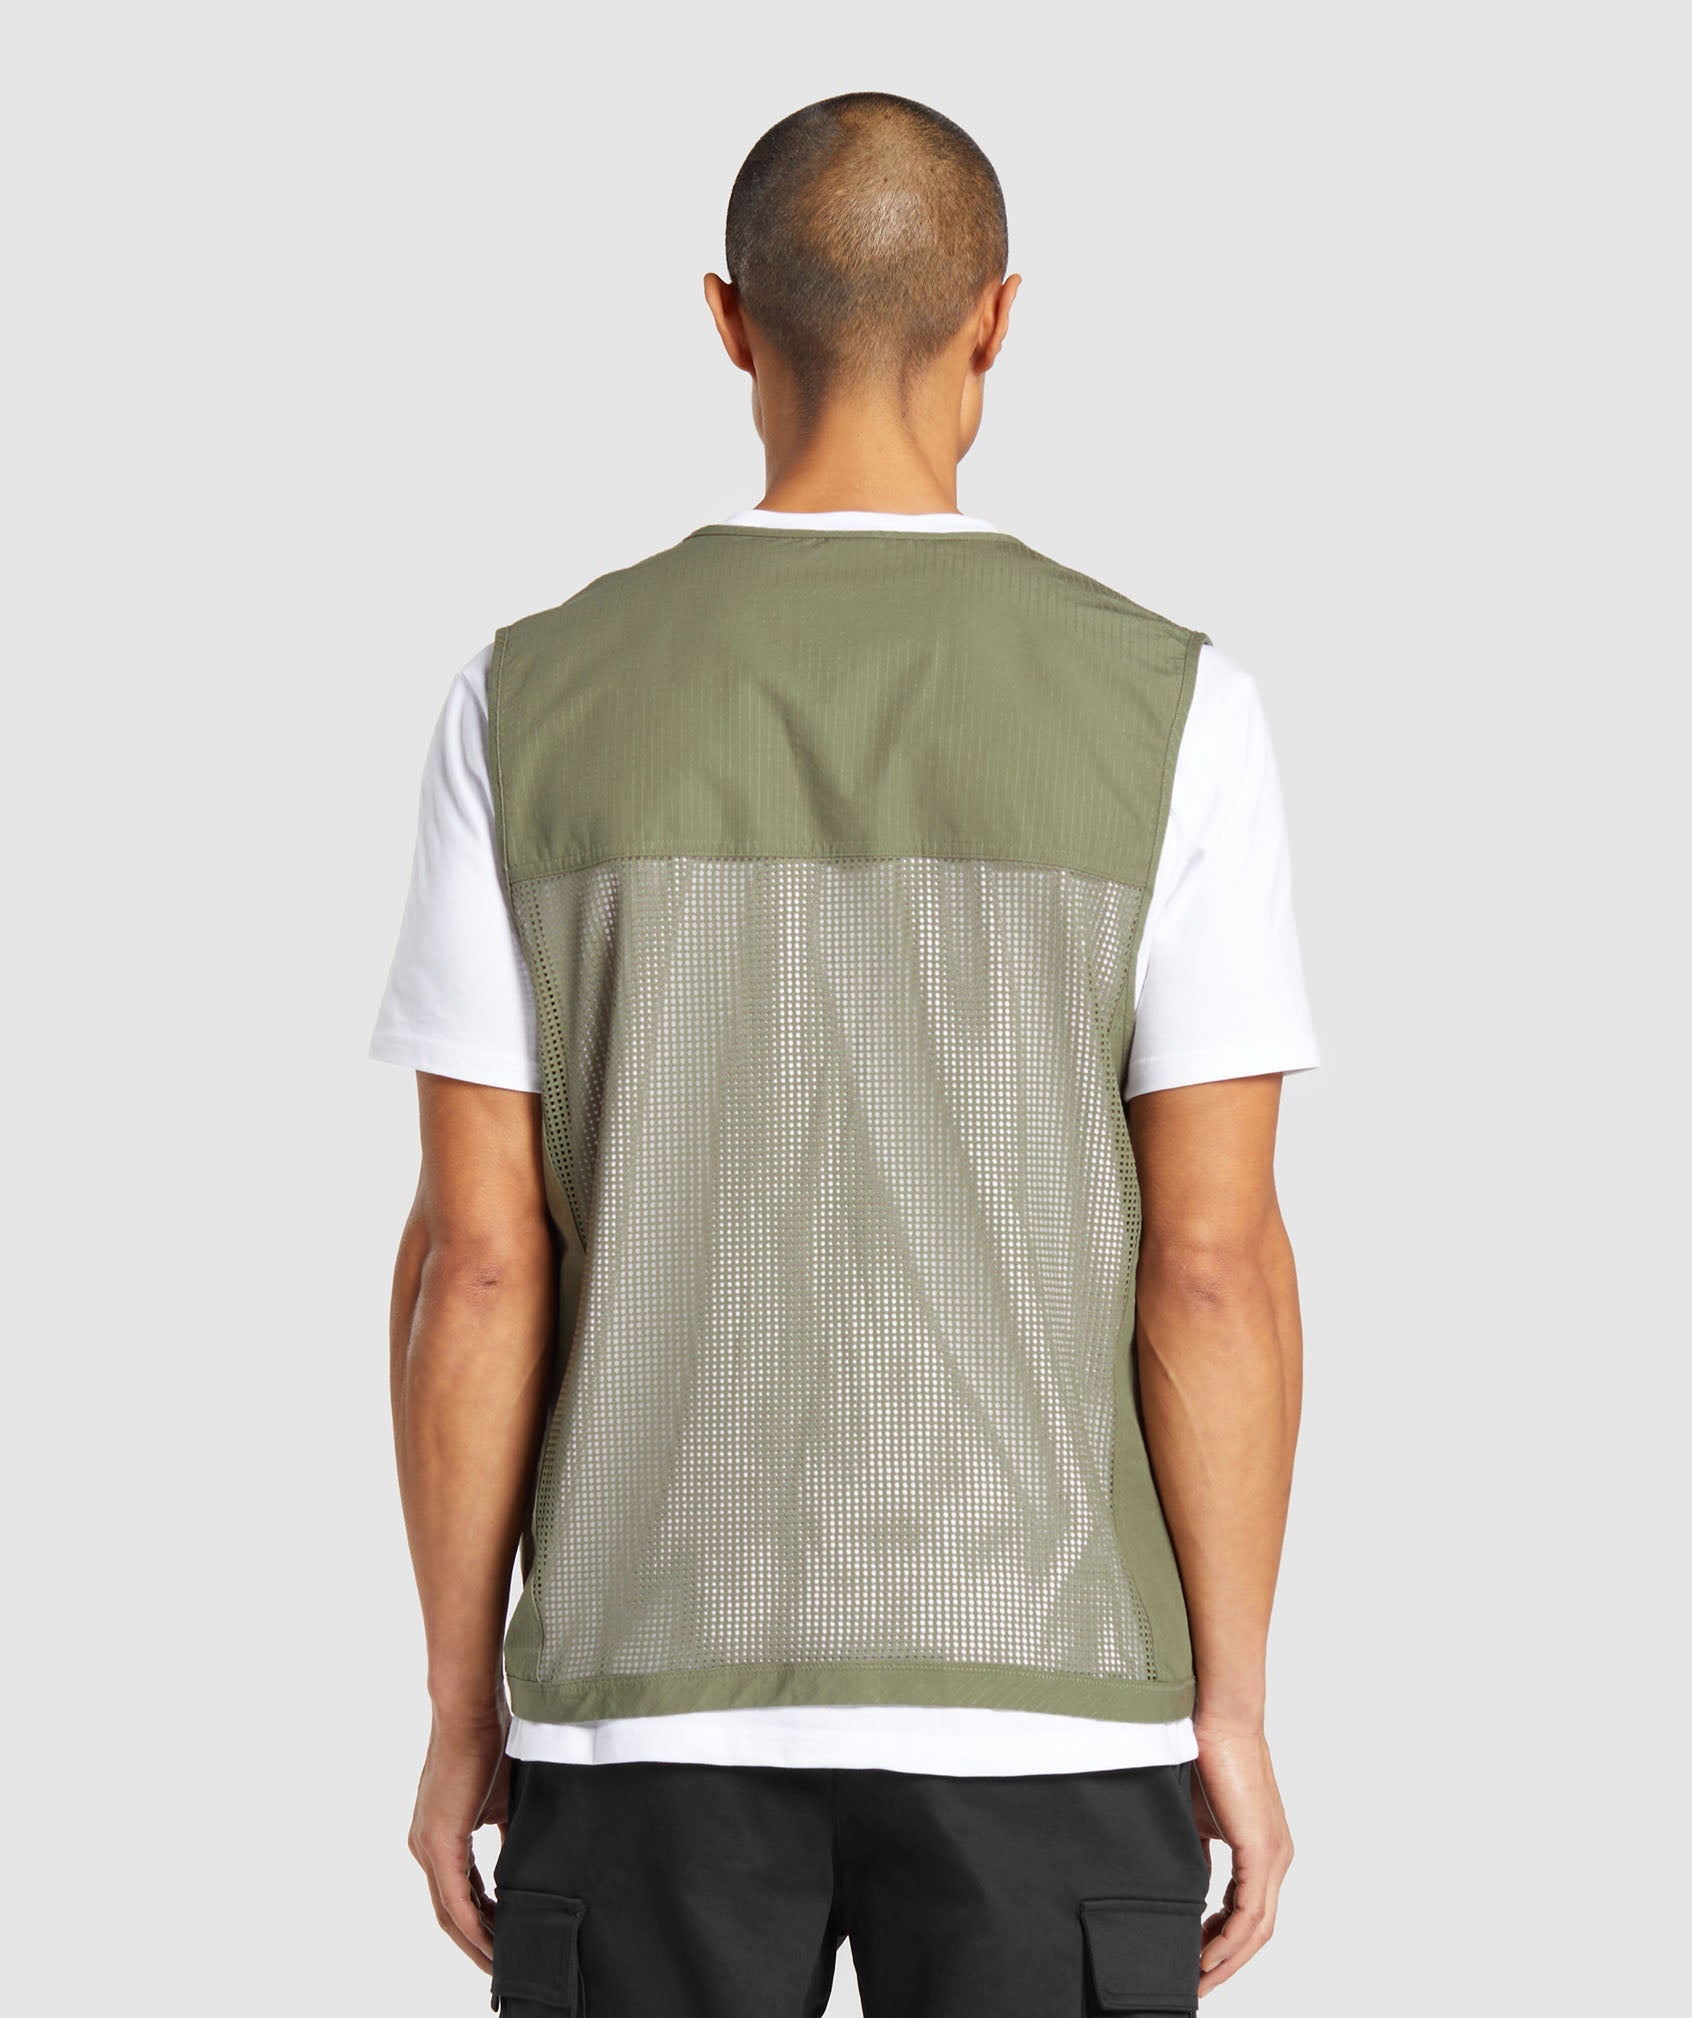 Woven Gilet in Utility Green - view 2